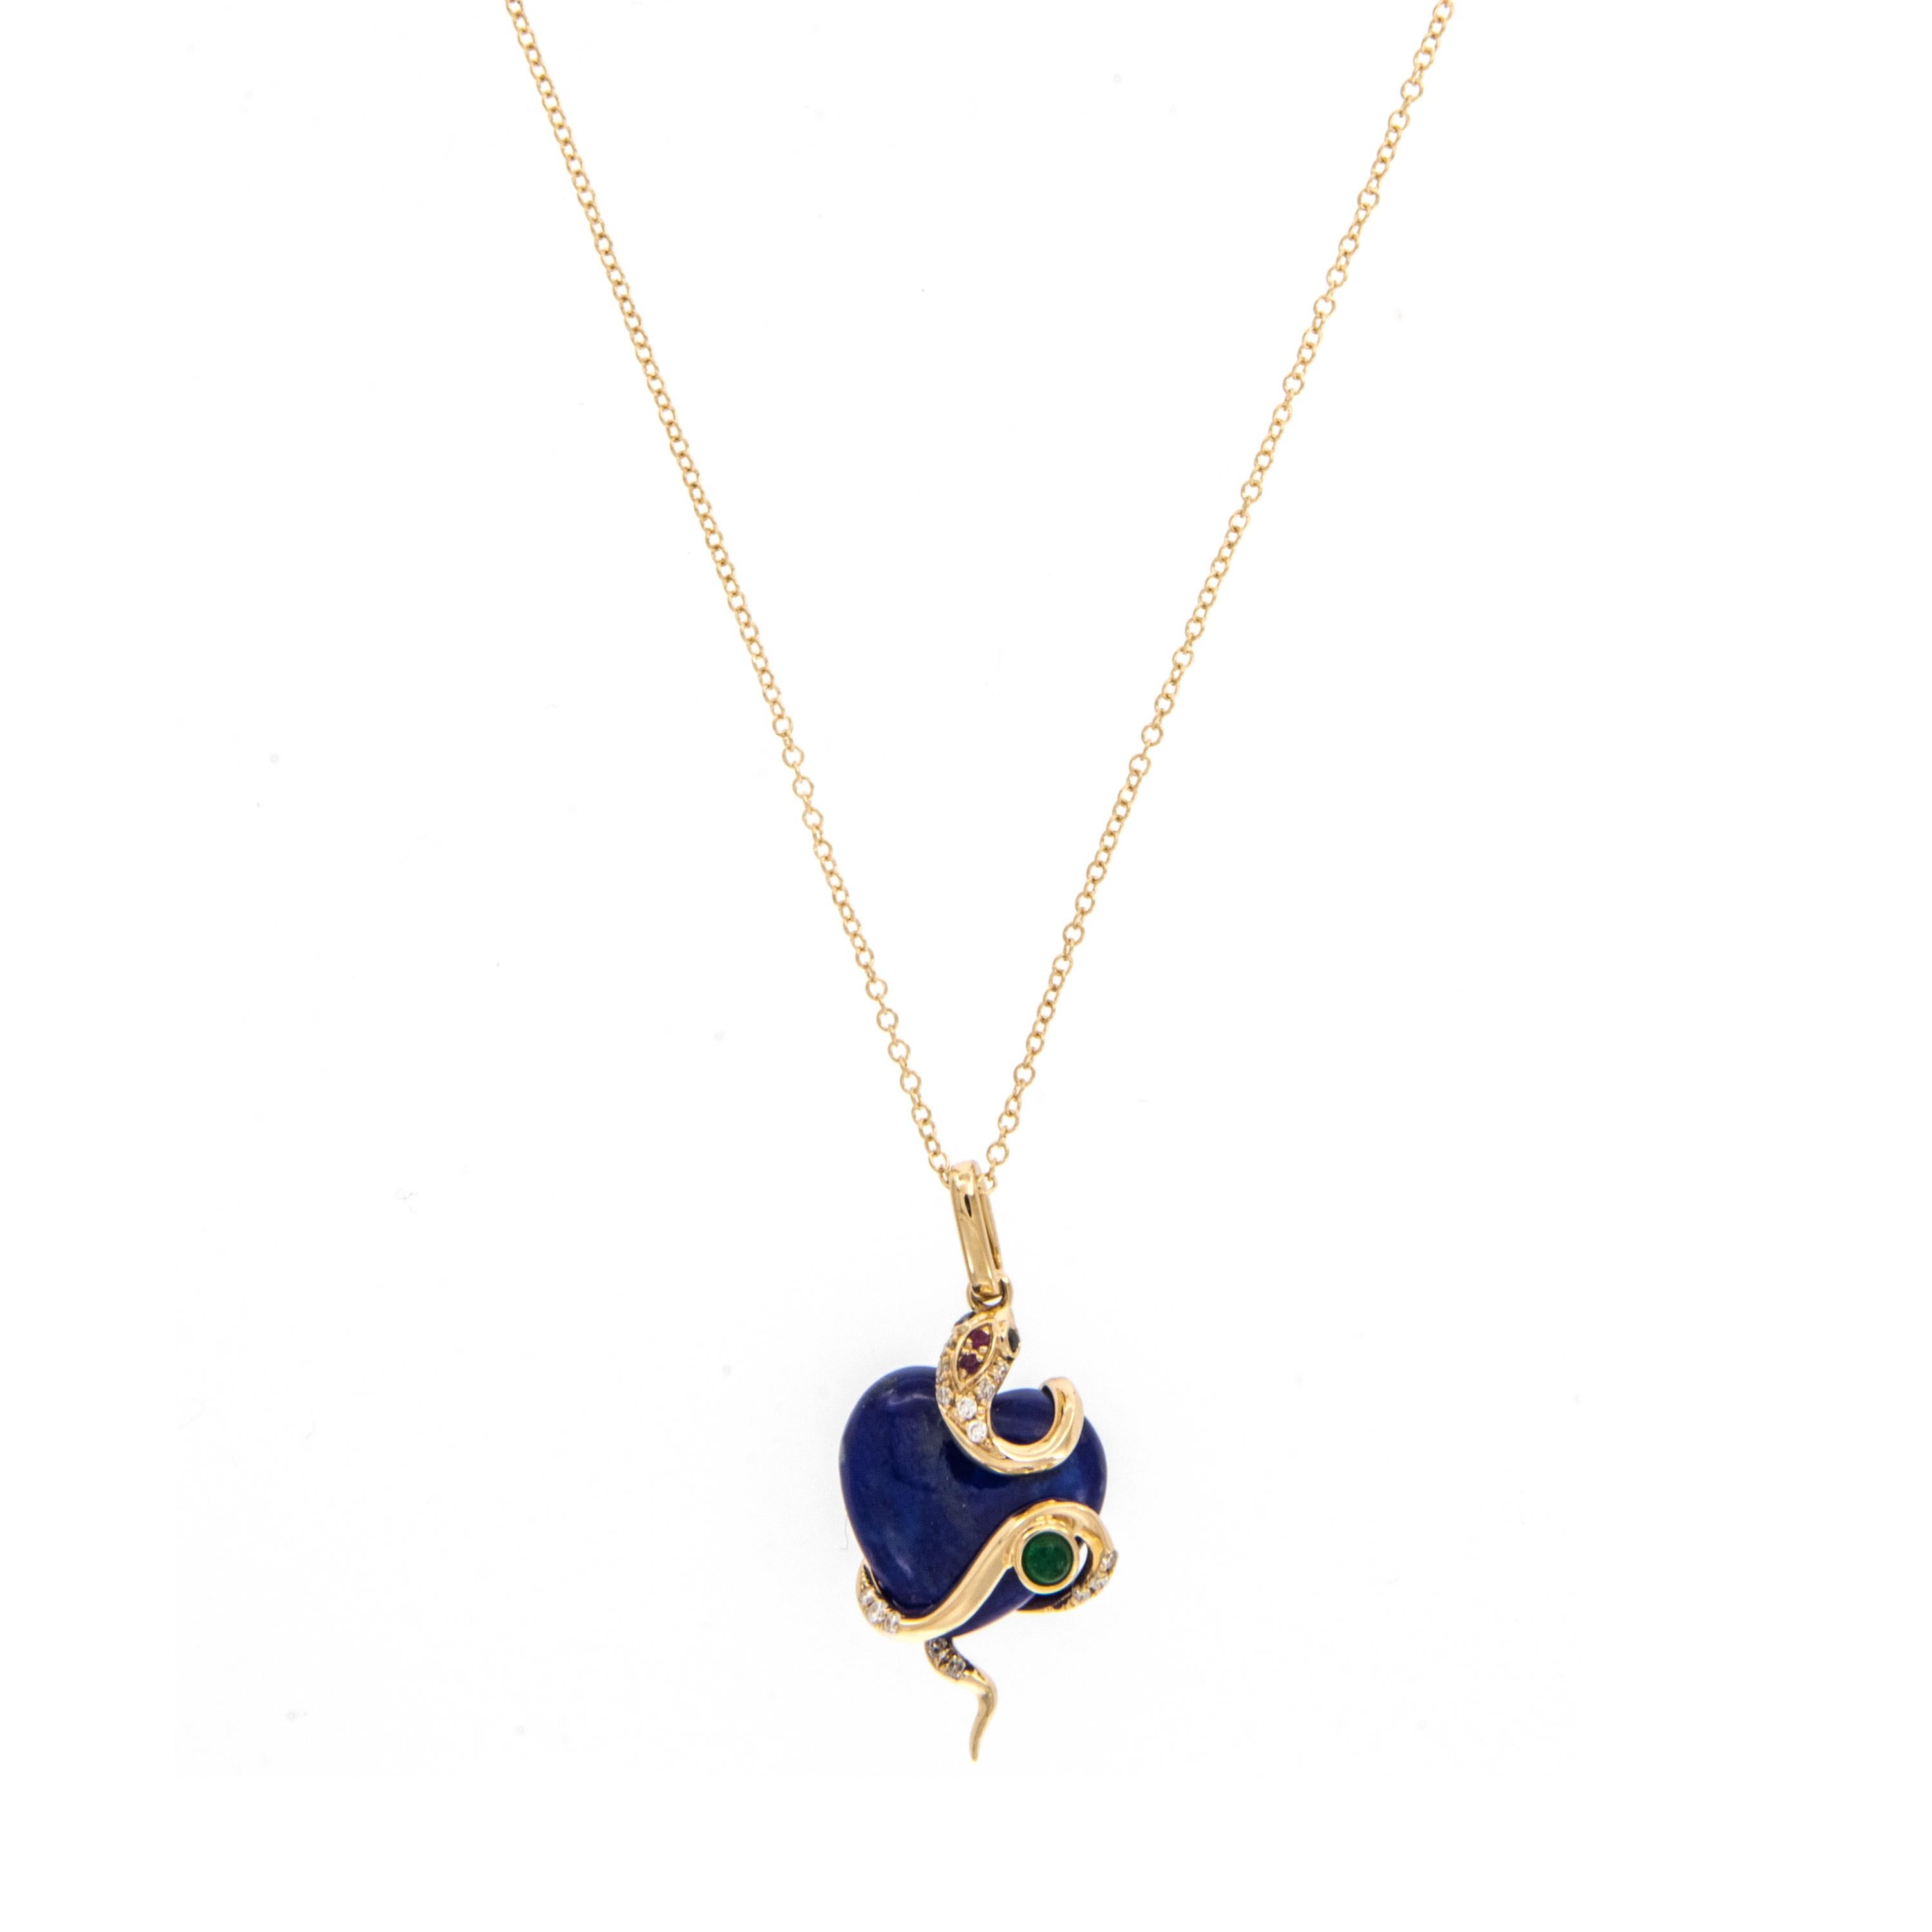 18 karat yellow gold 3.97 Ct lapis heart and serpent necklace with 1 emerald = 0.04 Ct, 2 brown diamond eyes = 0.01 Ct, 2 rubies= 0.01 Ct and 15 diamonds = 0.06 Cttw on a 18